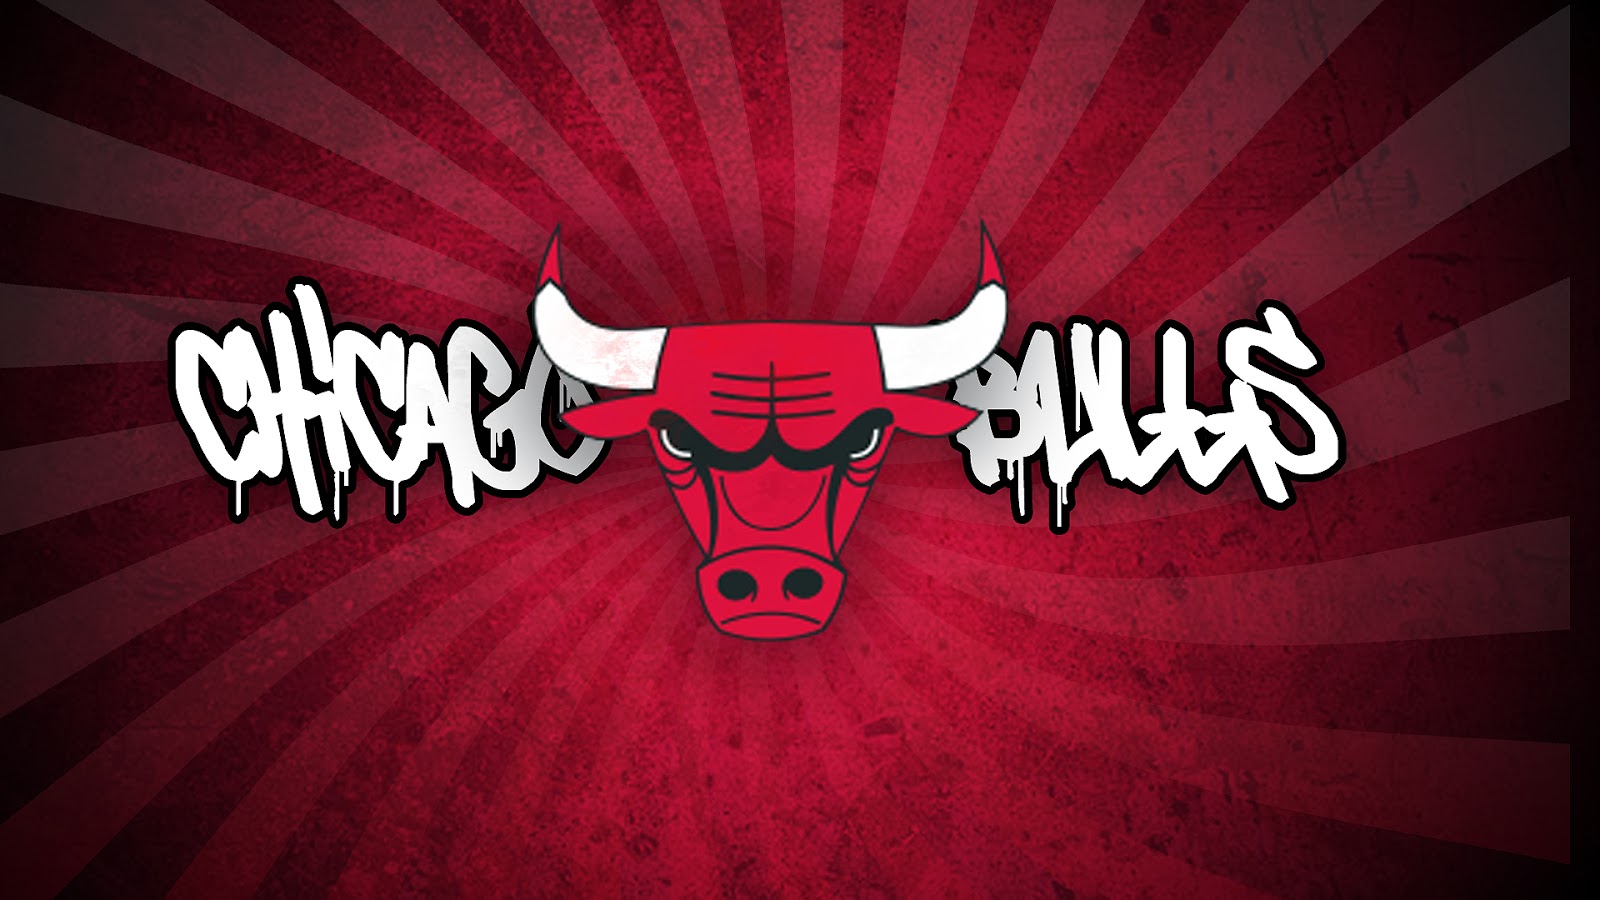 cool latest chicago bulls images high definition desktop wallpapers